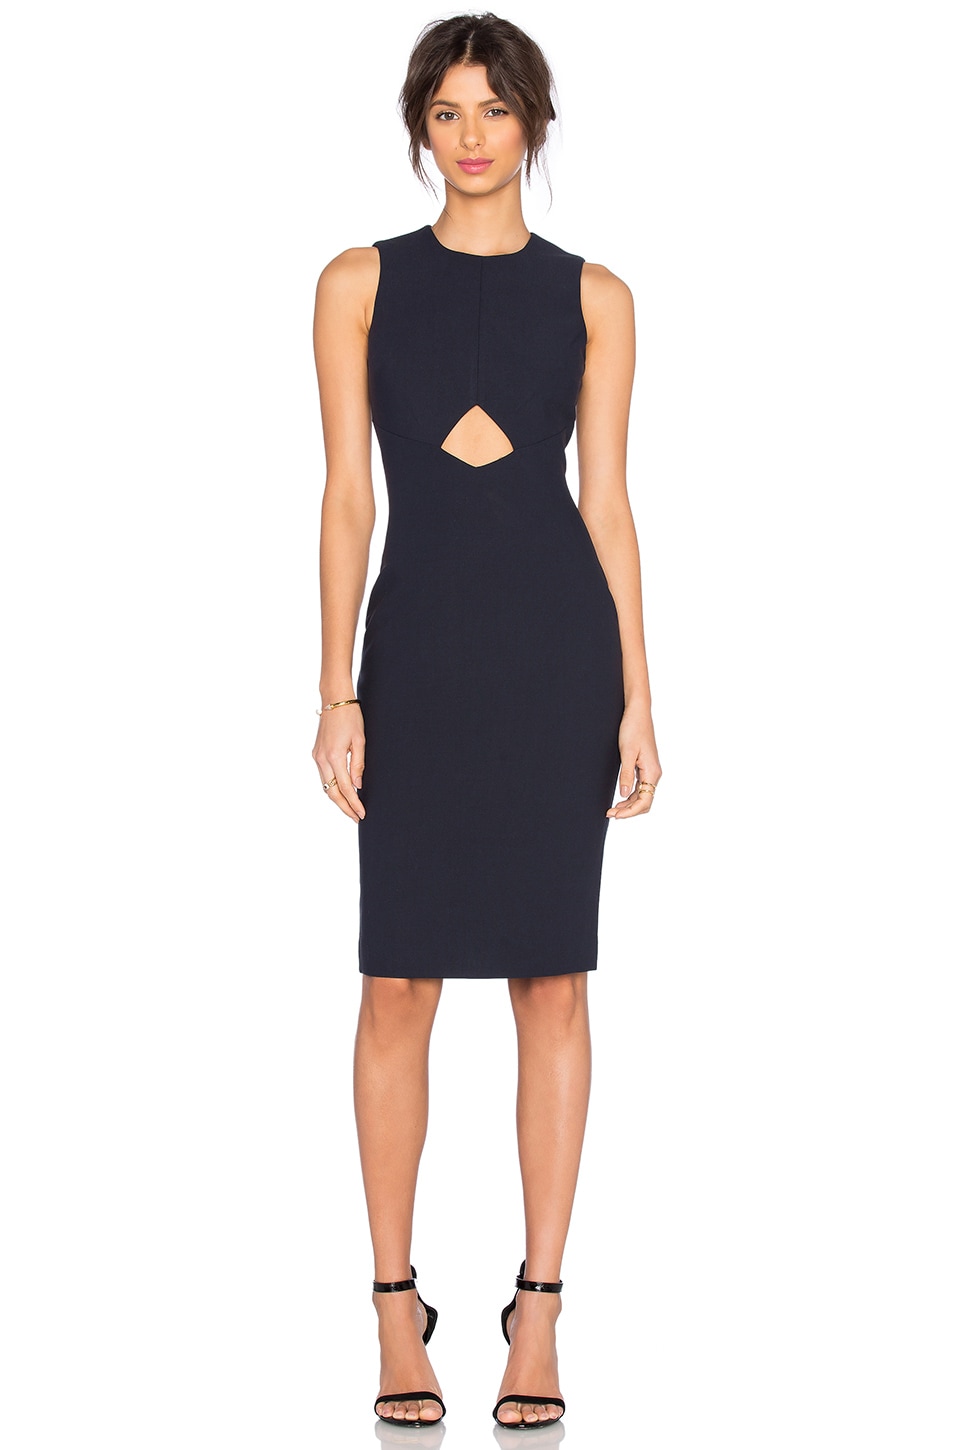 Elizabeth and James Sapphire Dress in French Navy | REVOLVE